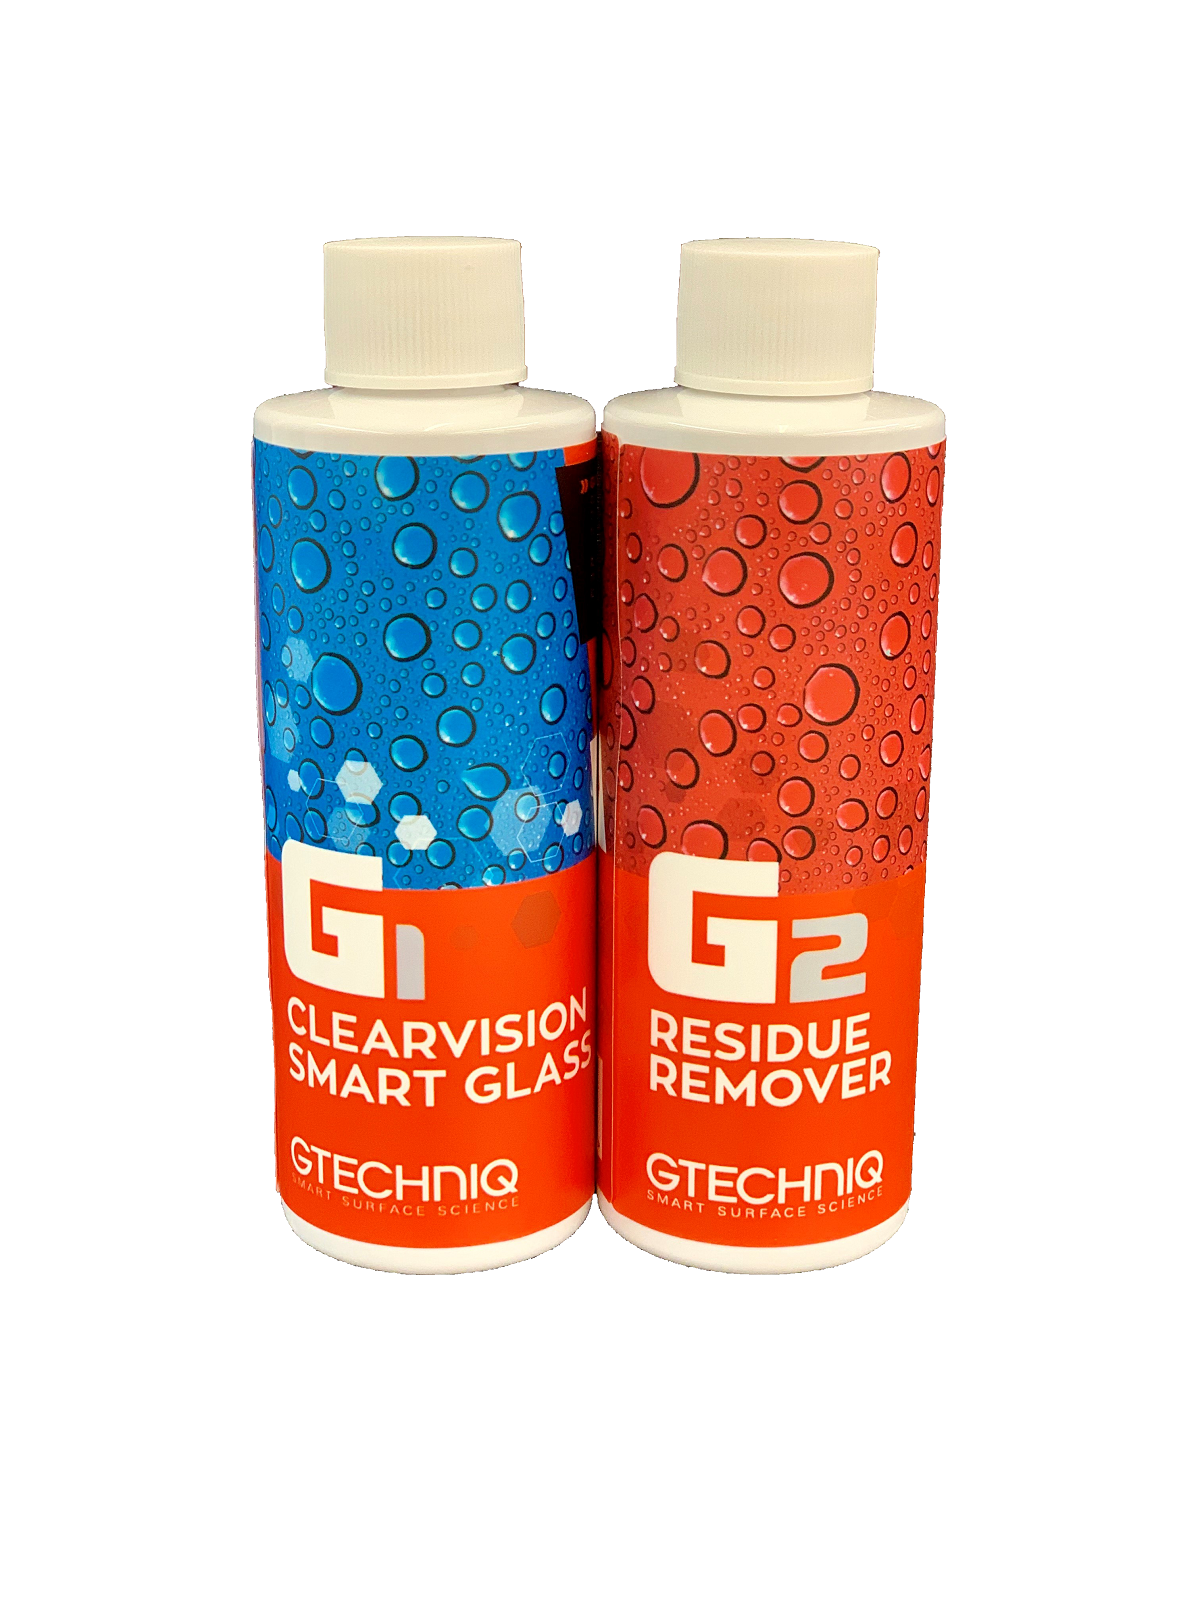 Gtechniq - G5 Water Repellent Coating for Glass and Perspex